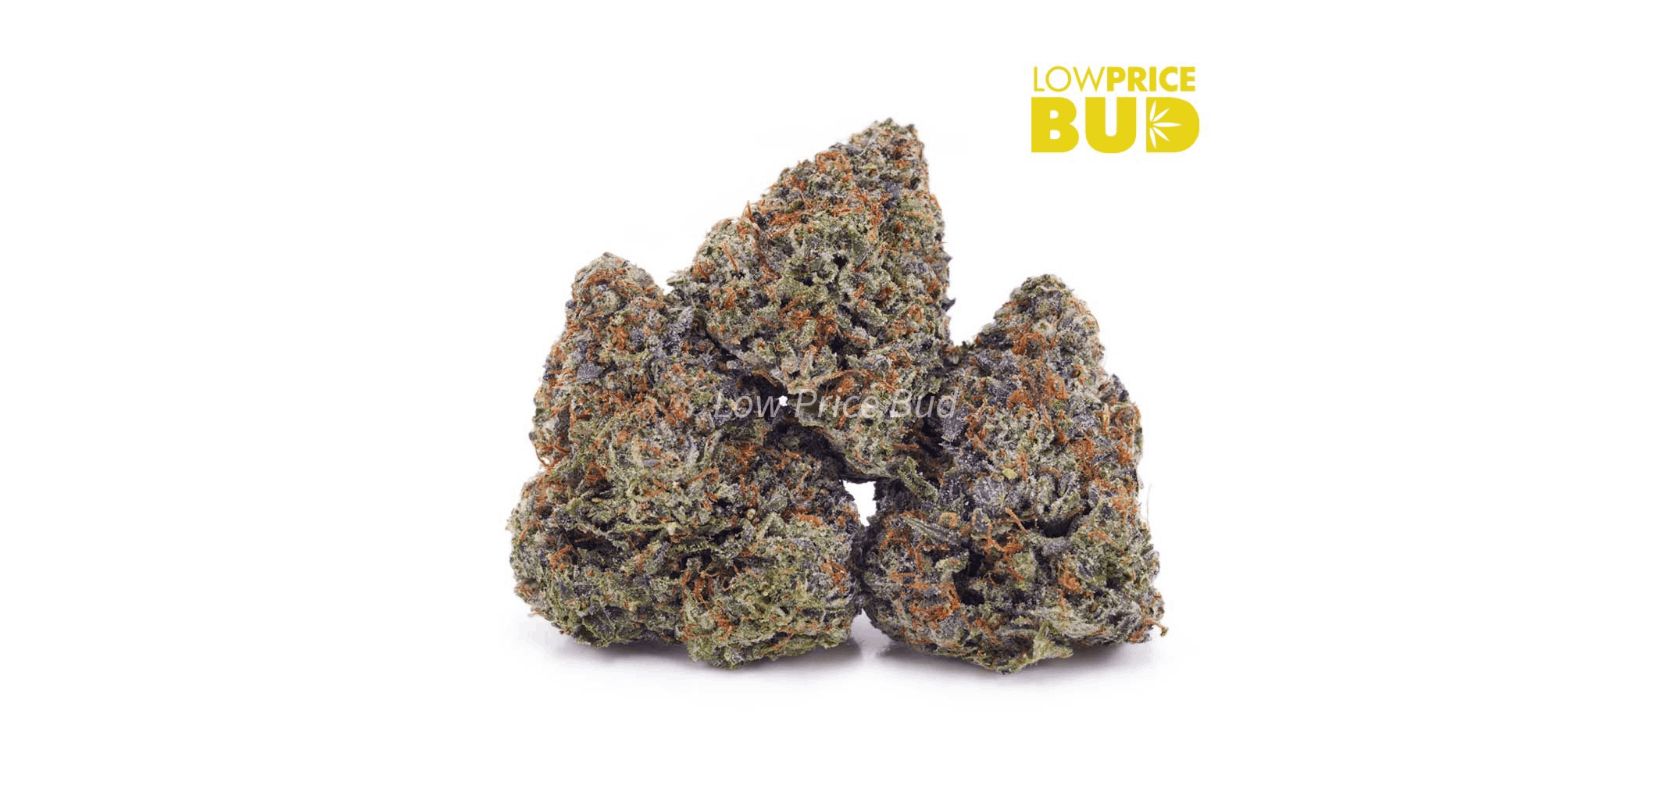 The Death Bubba AAAA strain is suitable for the boldest stoners - its pungent aroma alone is enough to knock you off your feet. 